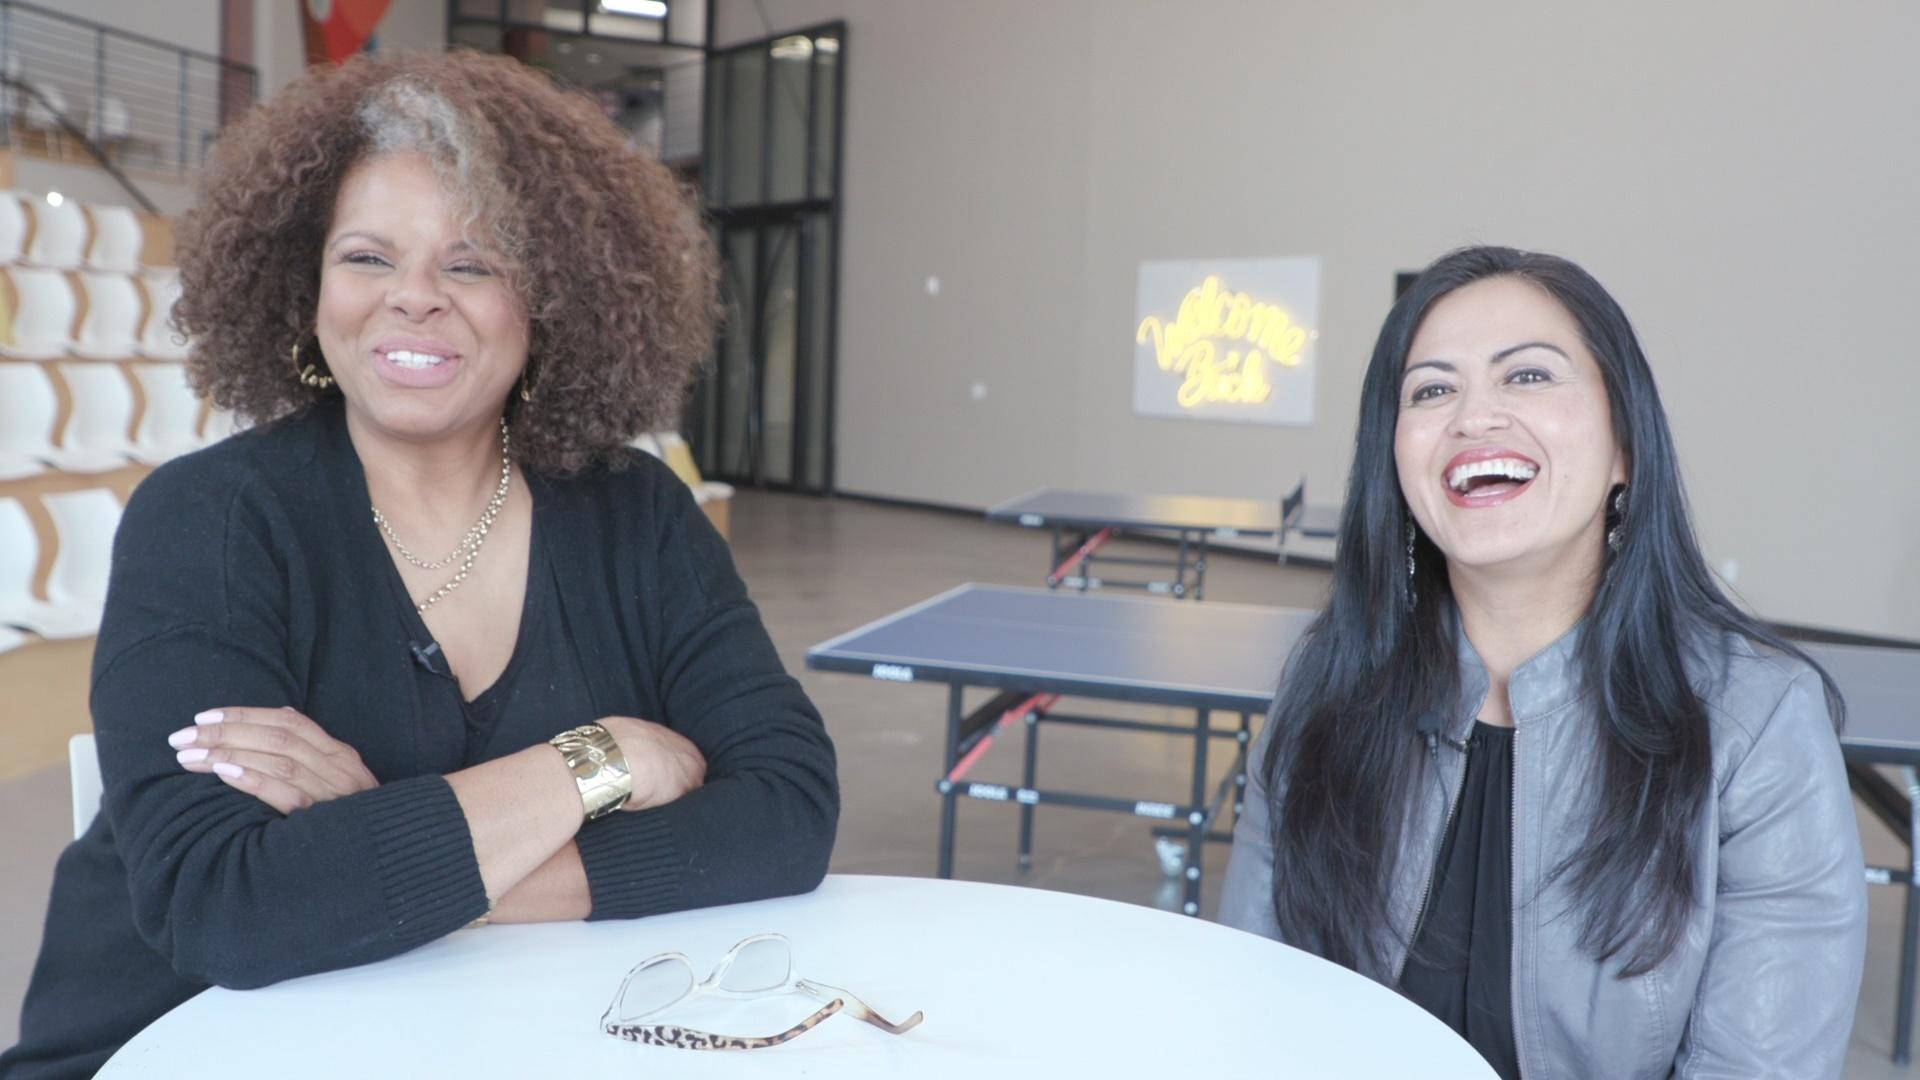 Barbara Brooks, left, and Guadalupe Hirt paired up four years ago to start SecondActWomen, a business community that connects women as they navigate life, careers and relationships.